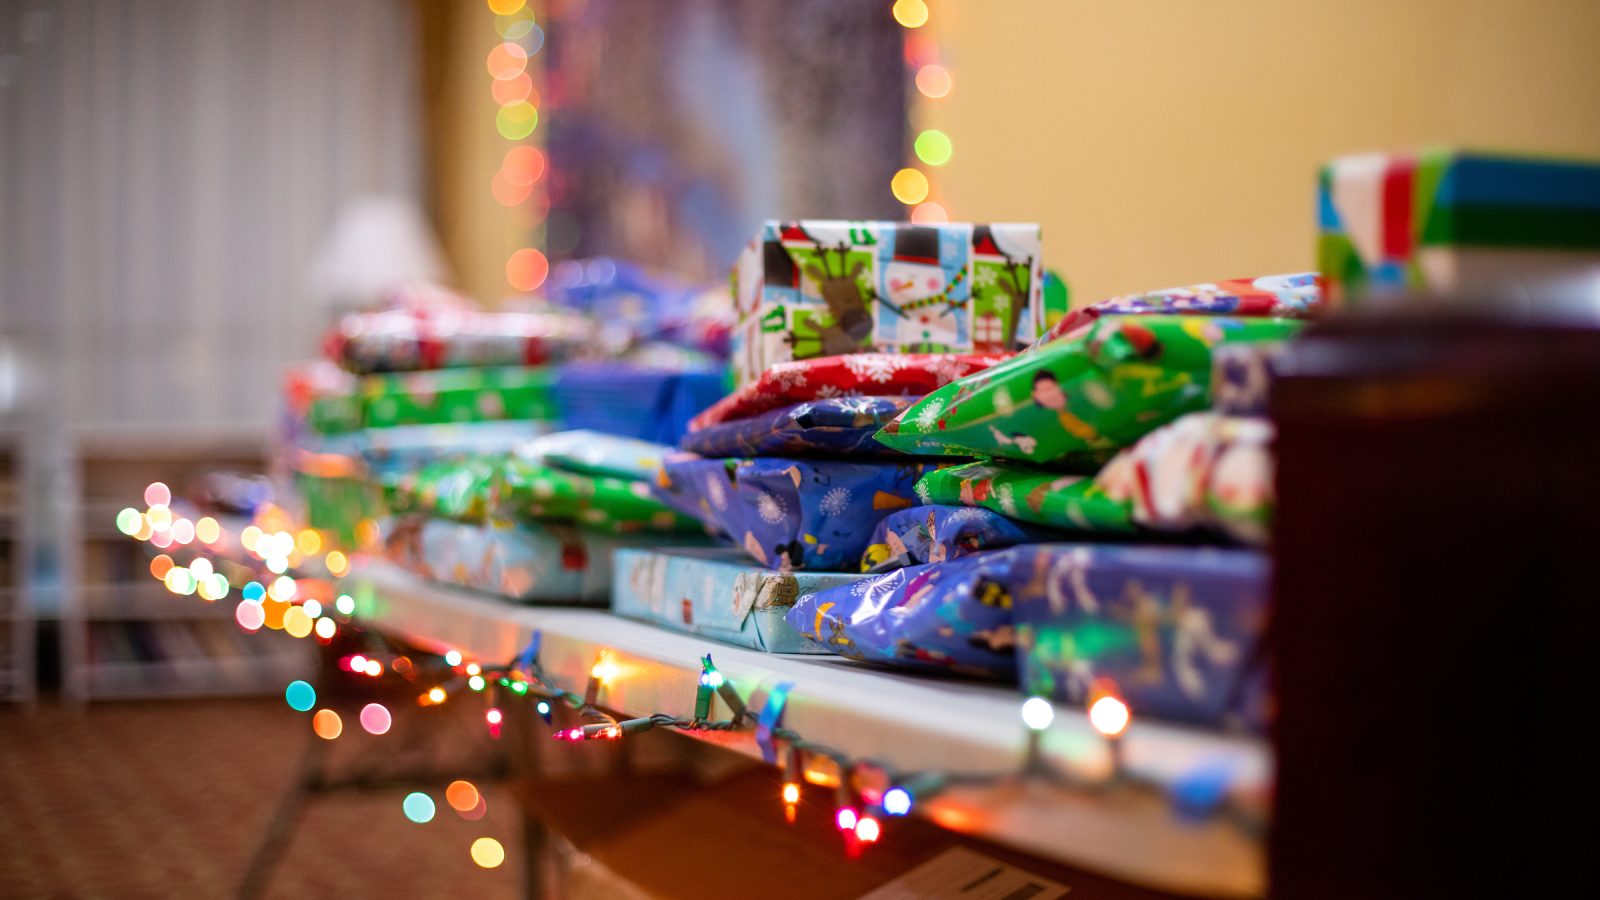 Wrapped gifts on a table with a string of multi-color lights